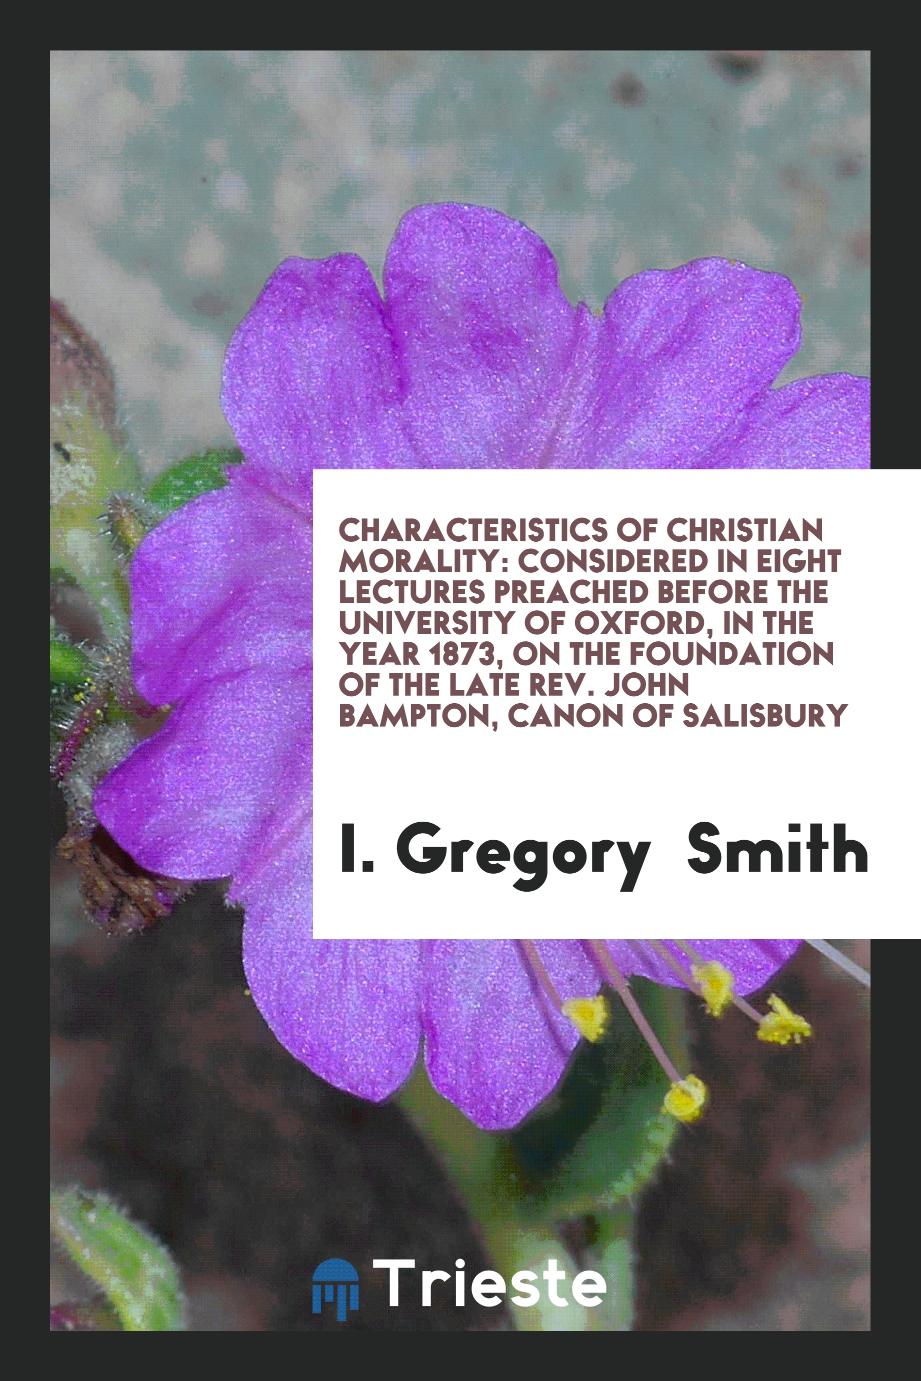 Characteristics of Christian Morality: Considered in Eight Lectures Preached Before the University of Oxford, in the Year 1873, on the Foundation of the Late Rev. John Bampton, Canon of Salisbury